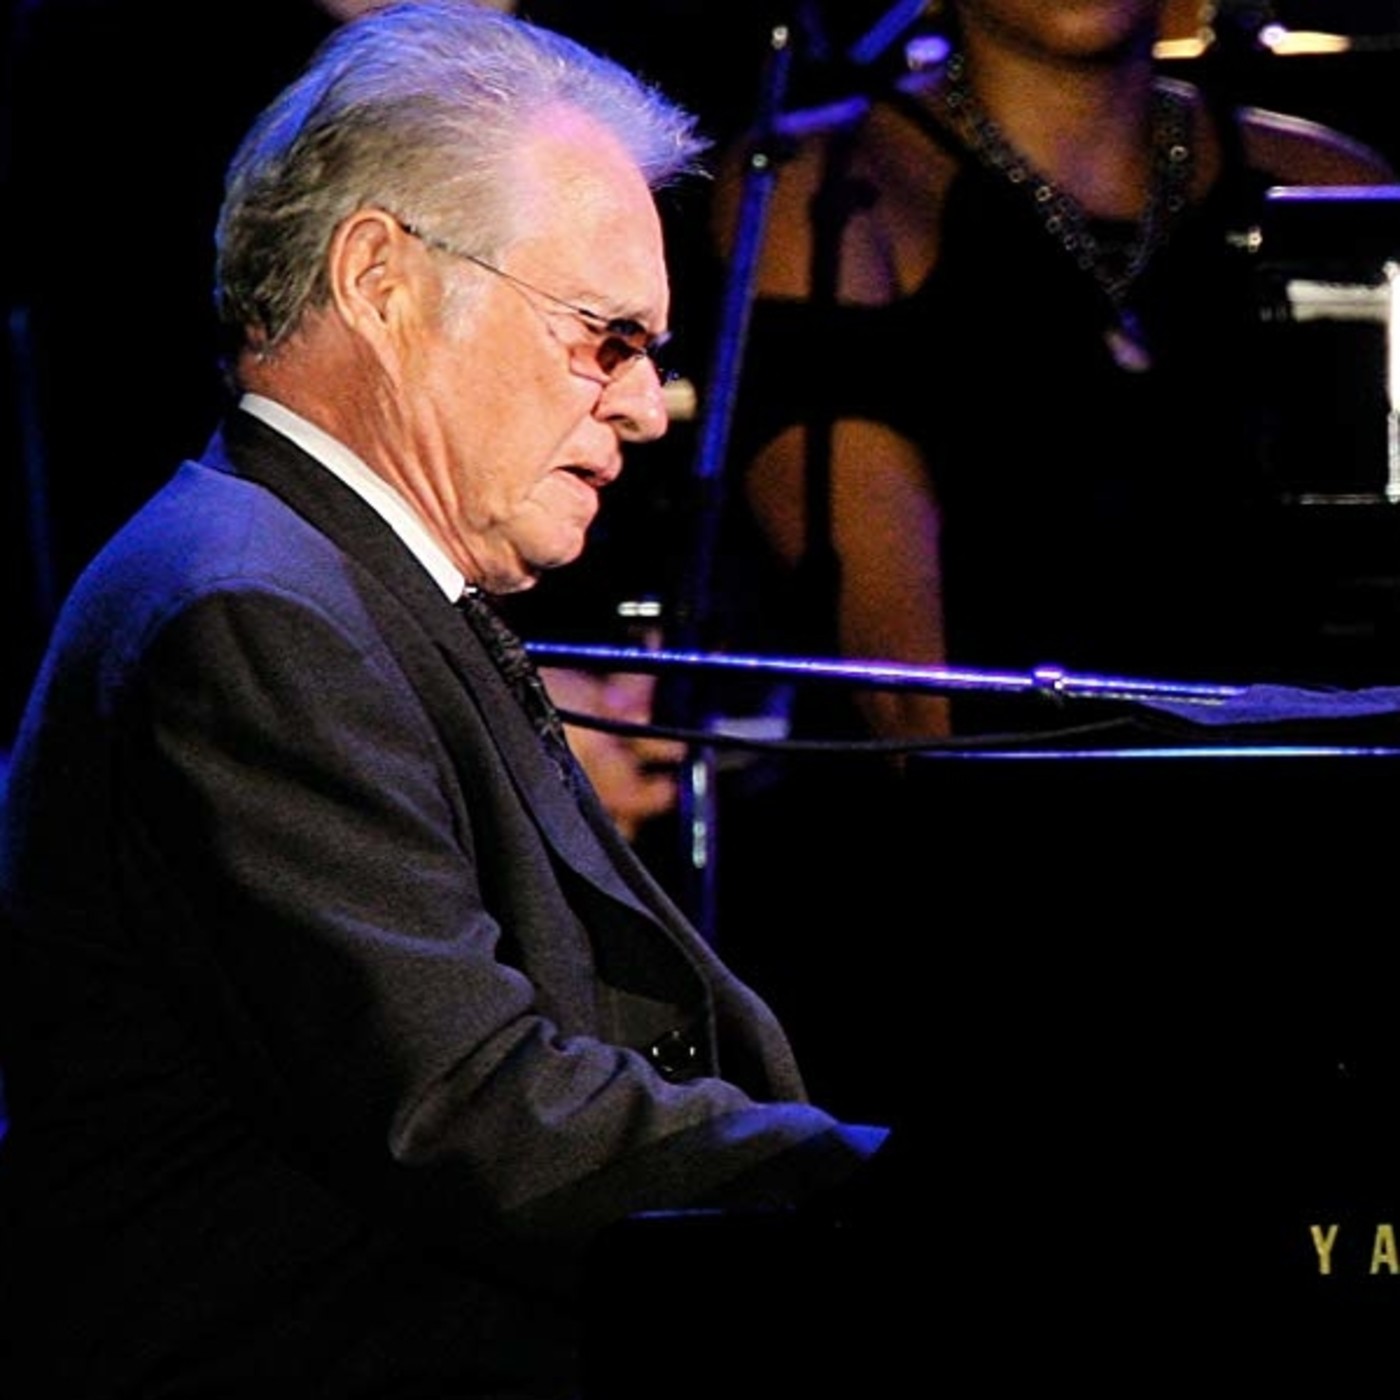 Dave grusin. Dave Grusin Jazz. Dave Grusin husband. Dave Grusin Blue and Green.